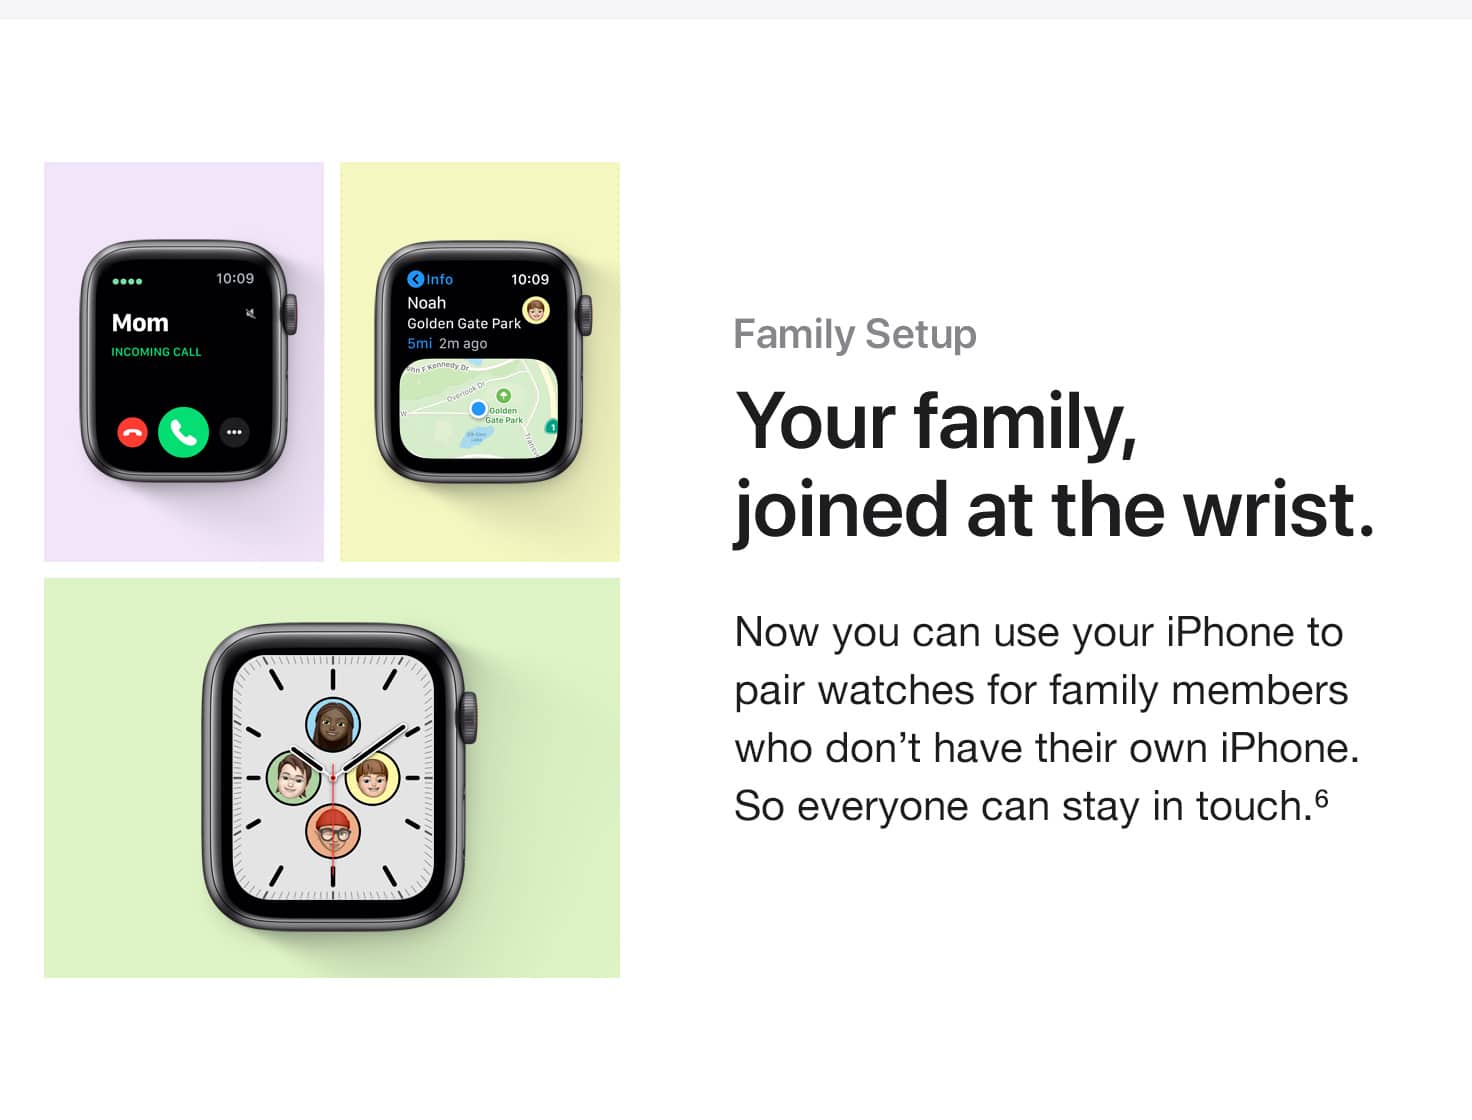 Family Setup. Your family, joined at the wrist. Now you can use your iPhone to pair watches for family members who don't have their own iPhone. So everyone can stay in touch.(6)